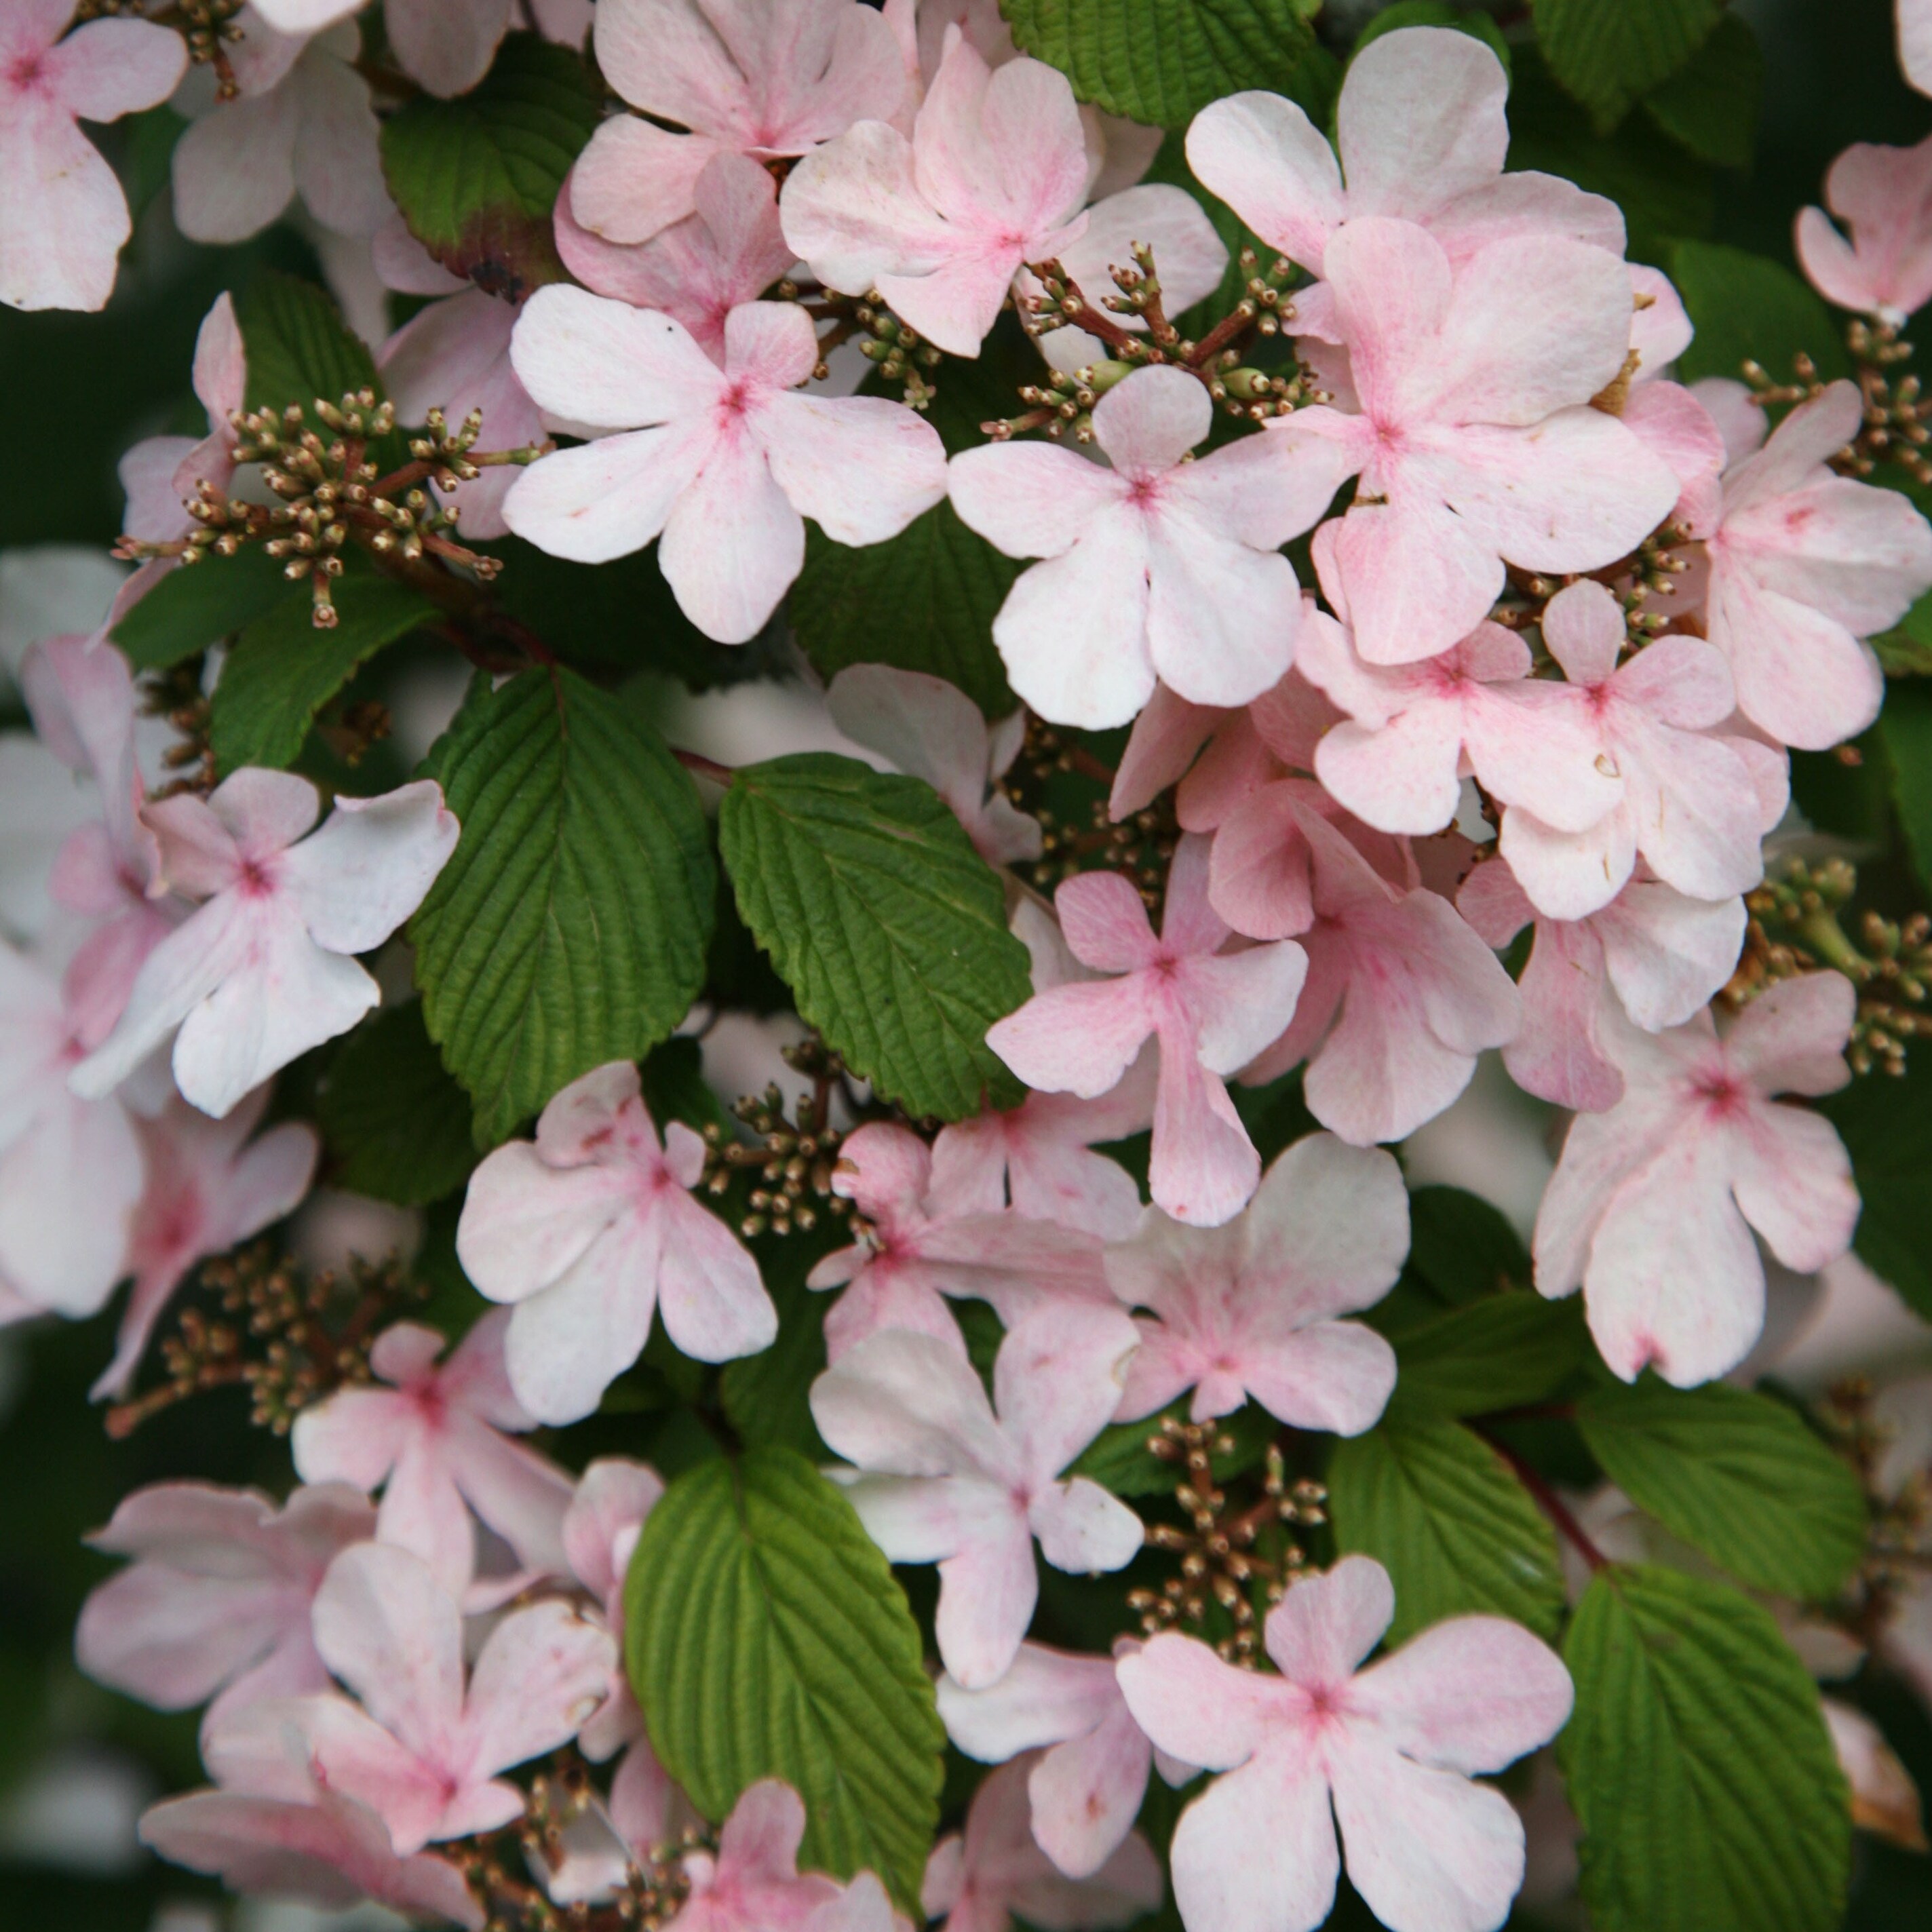 Image of Viburnum Pink Beauty shrub with pink flowers